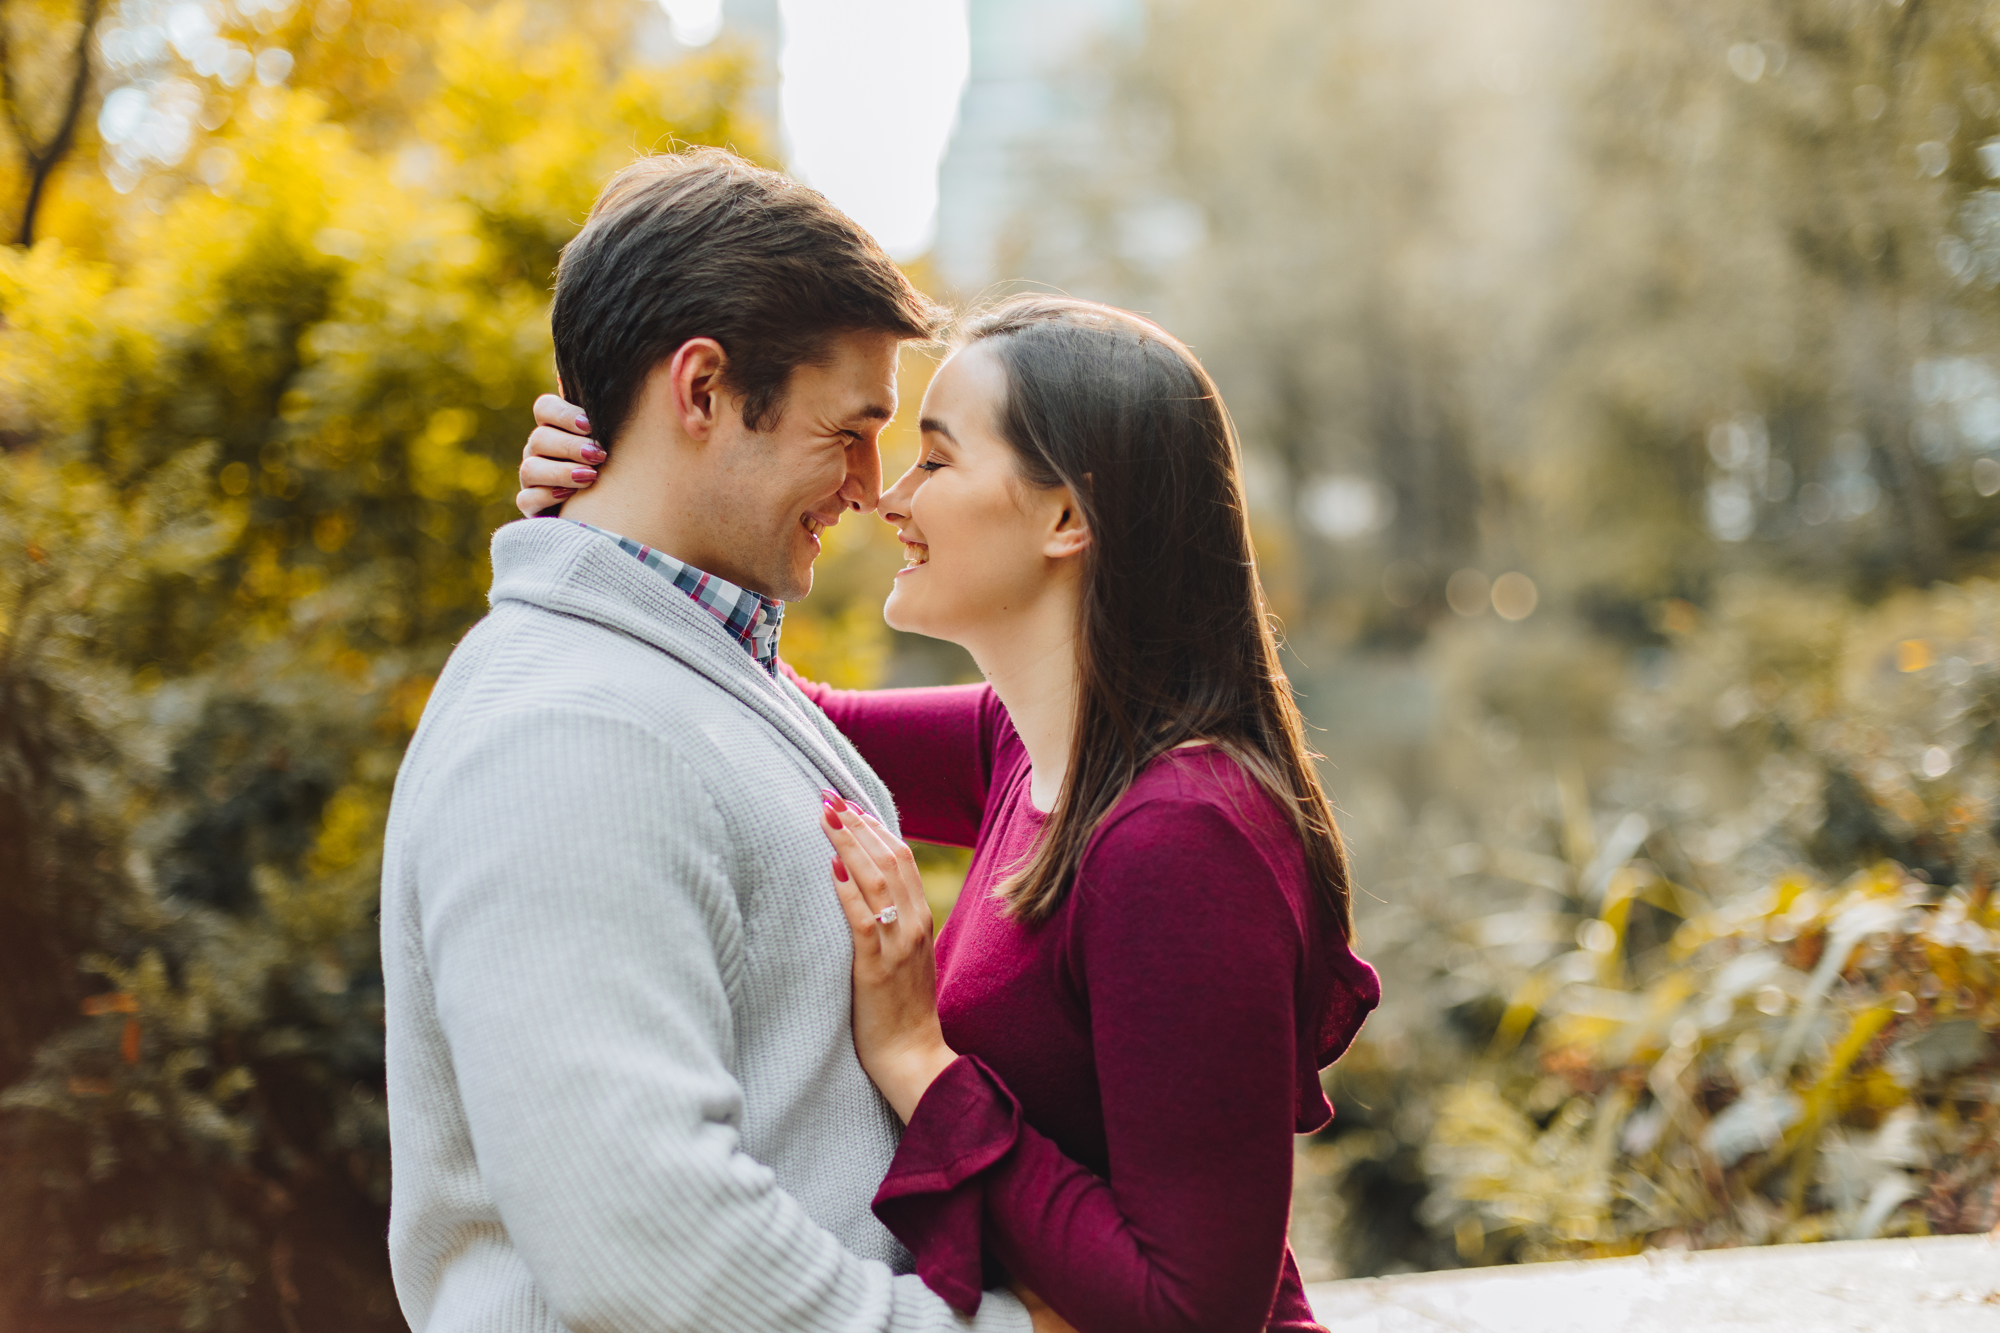 Dreamy Fall Engagement Photos in Central Park New York